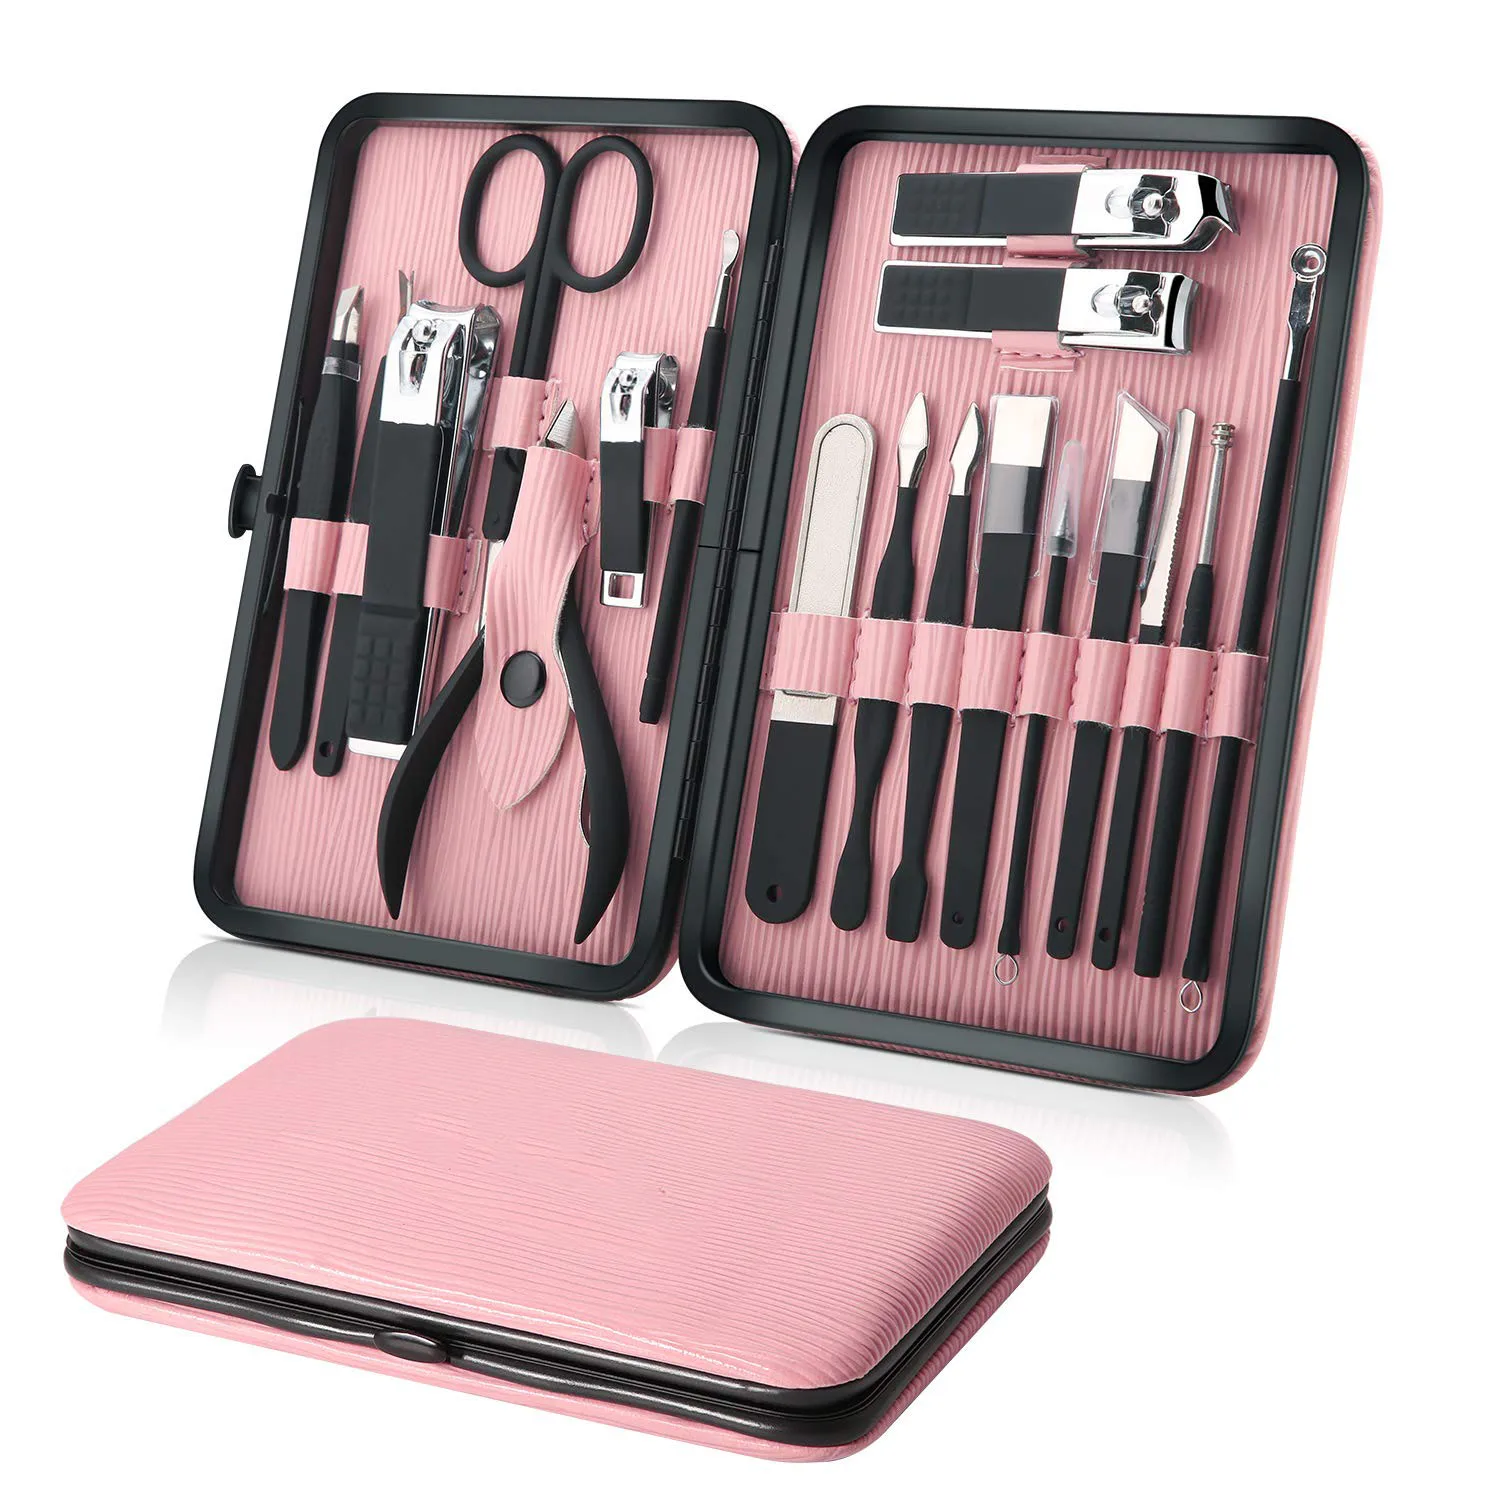 Onal nail clippers kit pedicure care tools stainless steel women grooming kit 18pcs for thumb200